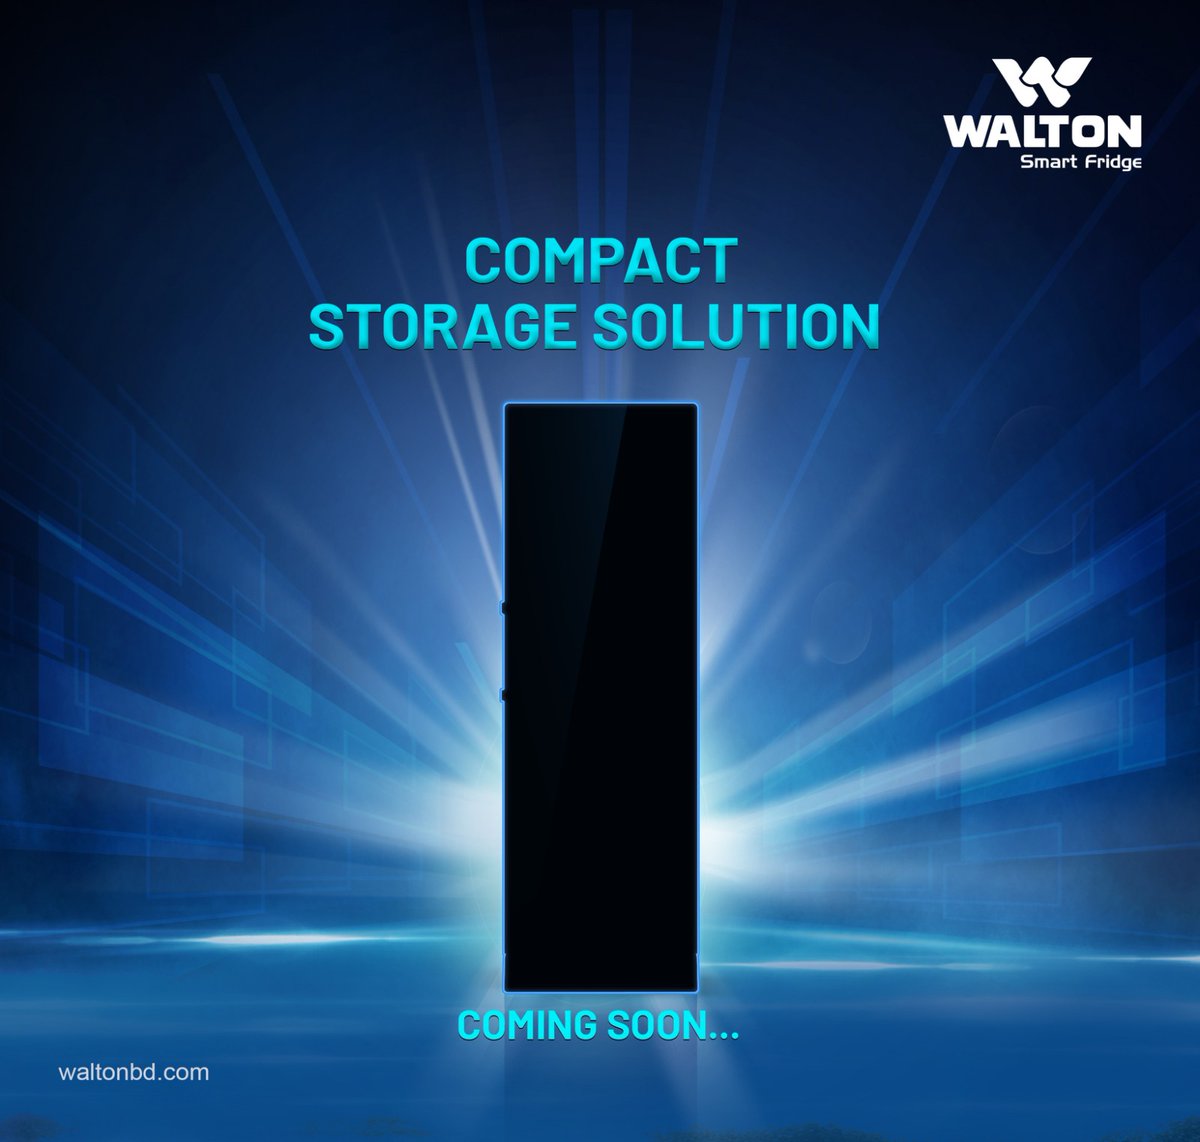 In our daily life, we try to find out something for organized storage purposes. Are you looking for something right that..??? We are bringing a compact solution very soon for you. 

Stay tuned with us.

#ComingSoon 
#FrozenFoodGameChanger 
#SleekStorage 
#StayTuned #Walton